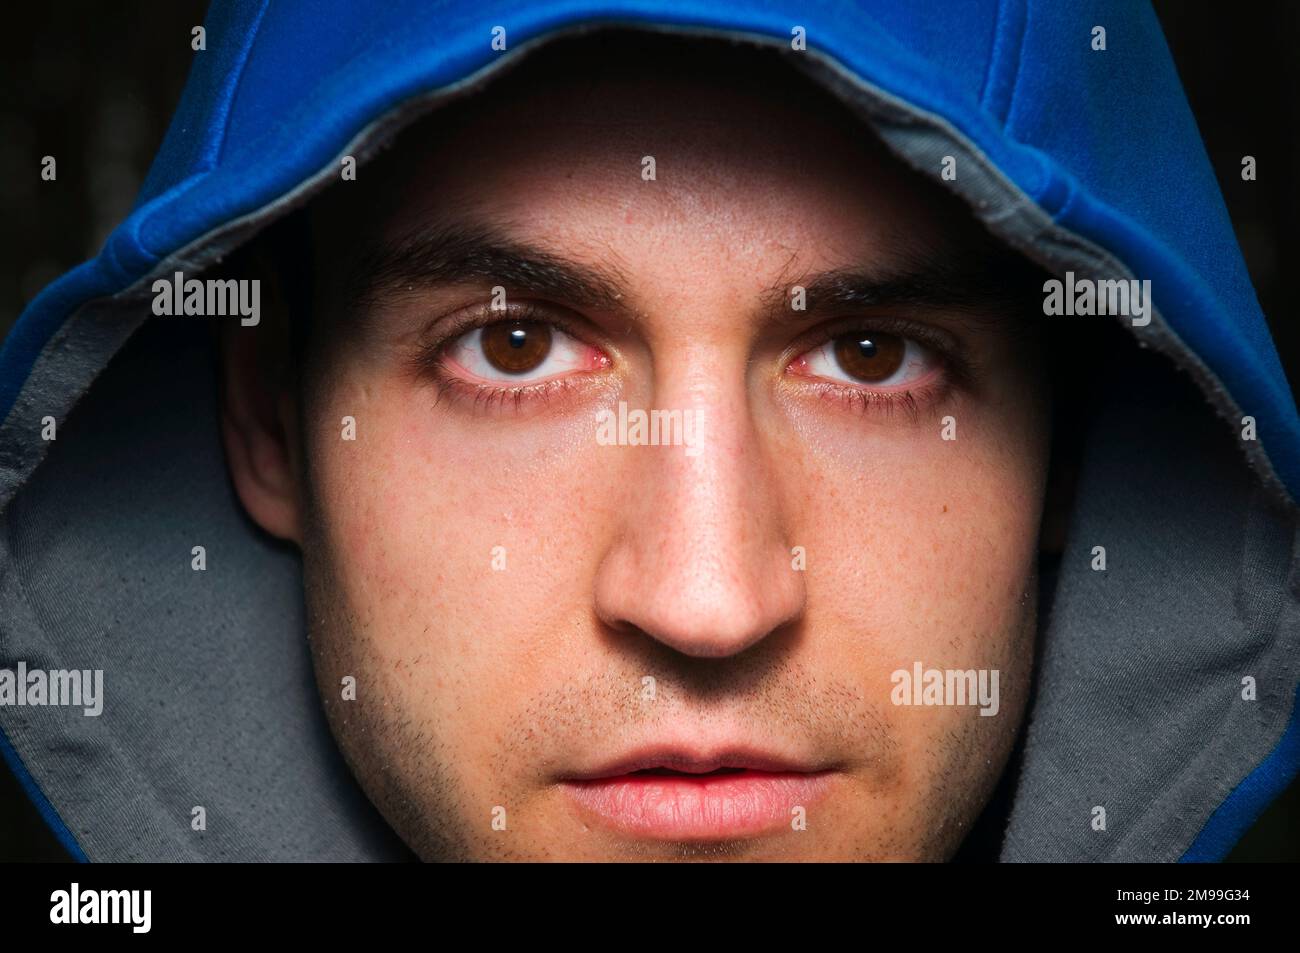 Frontal face portrait of a blue hooded young man looking directly and piercingly at the camera. Stock Photo